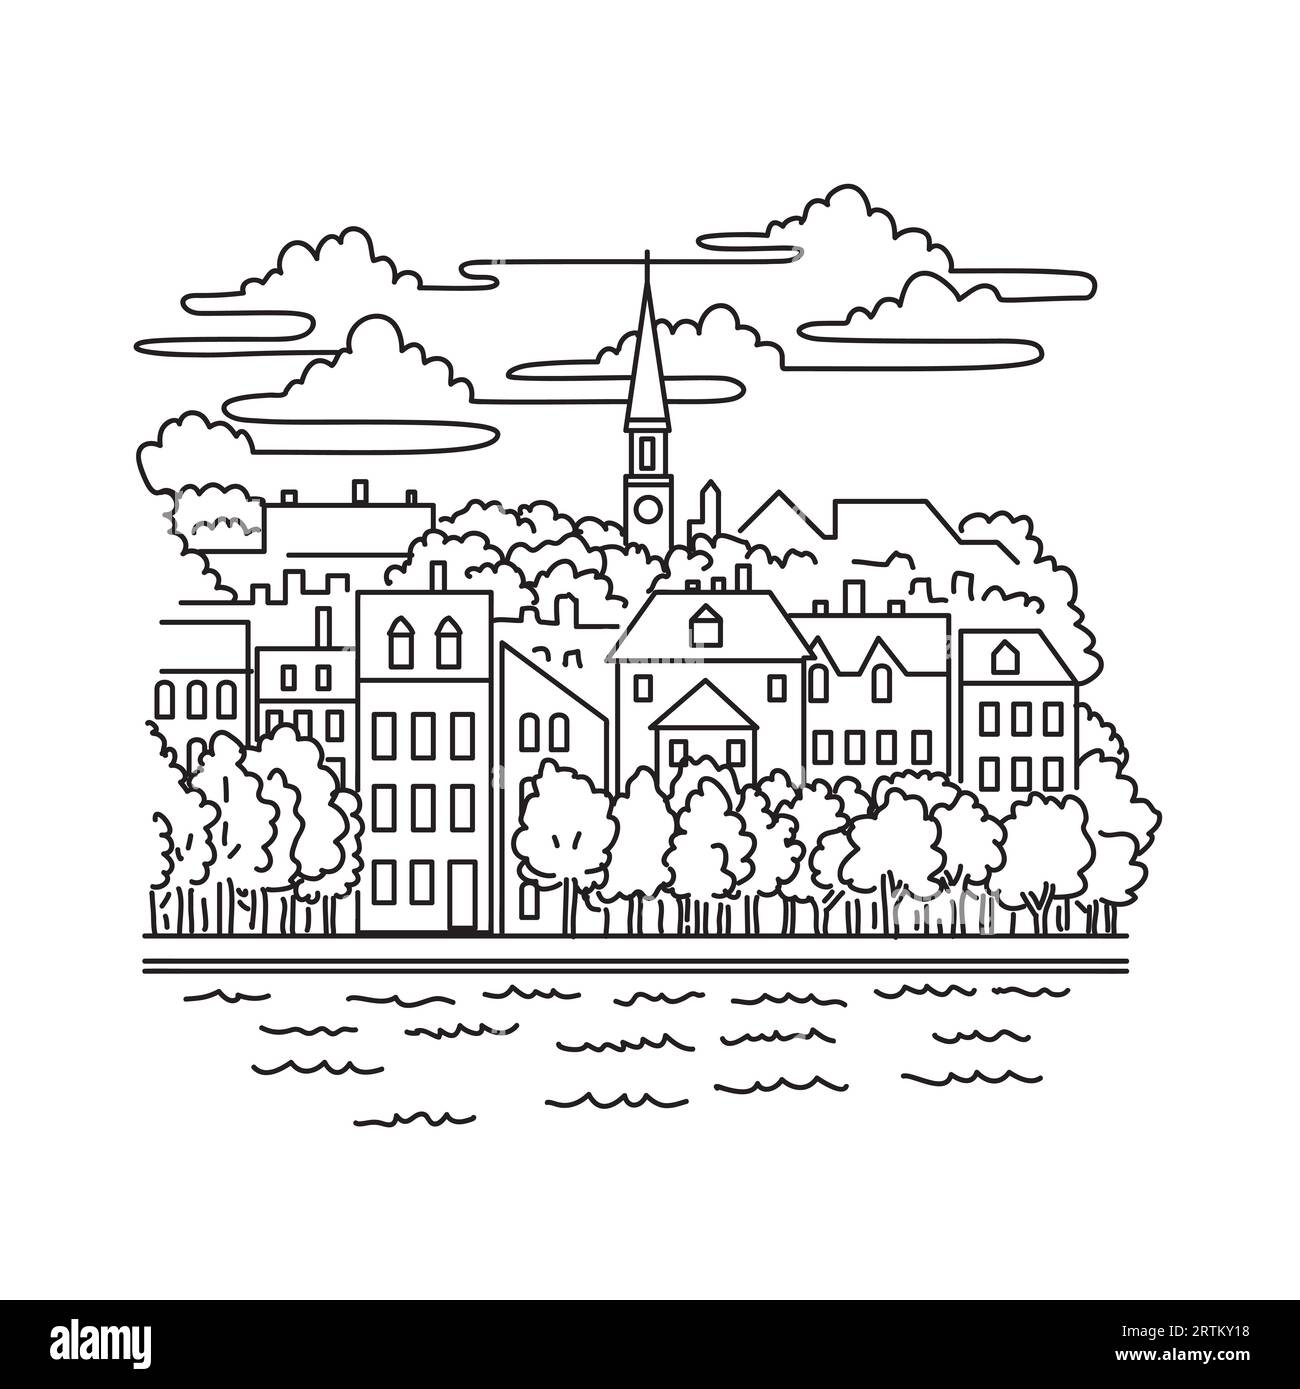 Mono line illustration of Old Town Alexandria along the Potomac River in the city of Alexandria, Virginia, United States of America done in monoline l Stock Photo